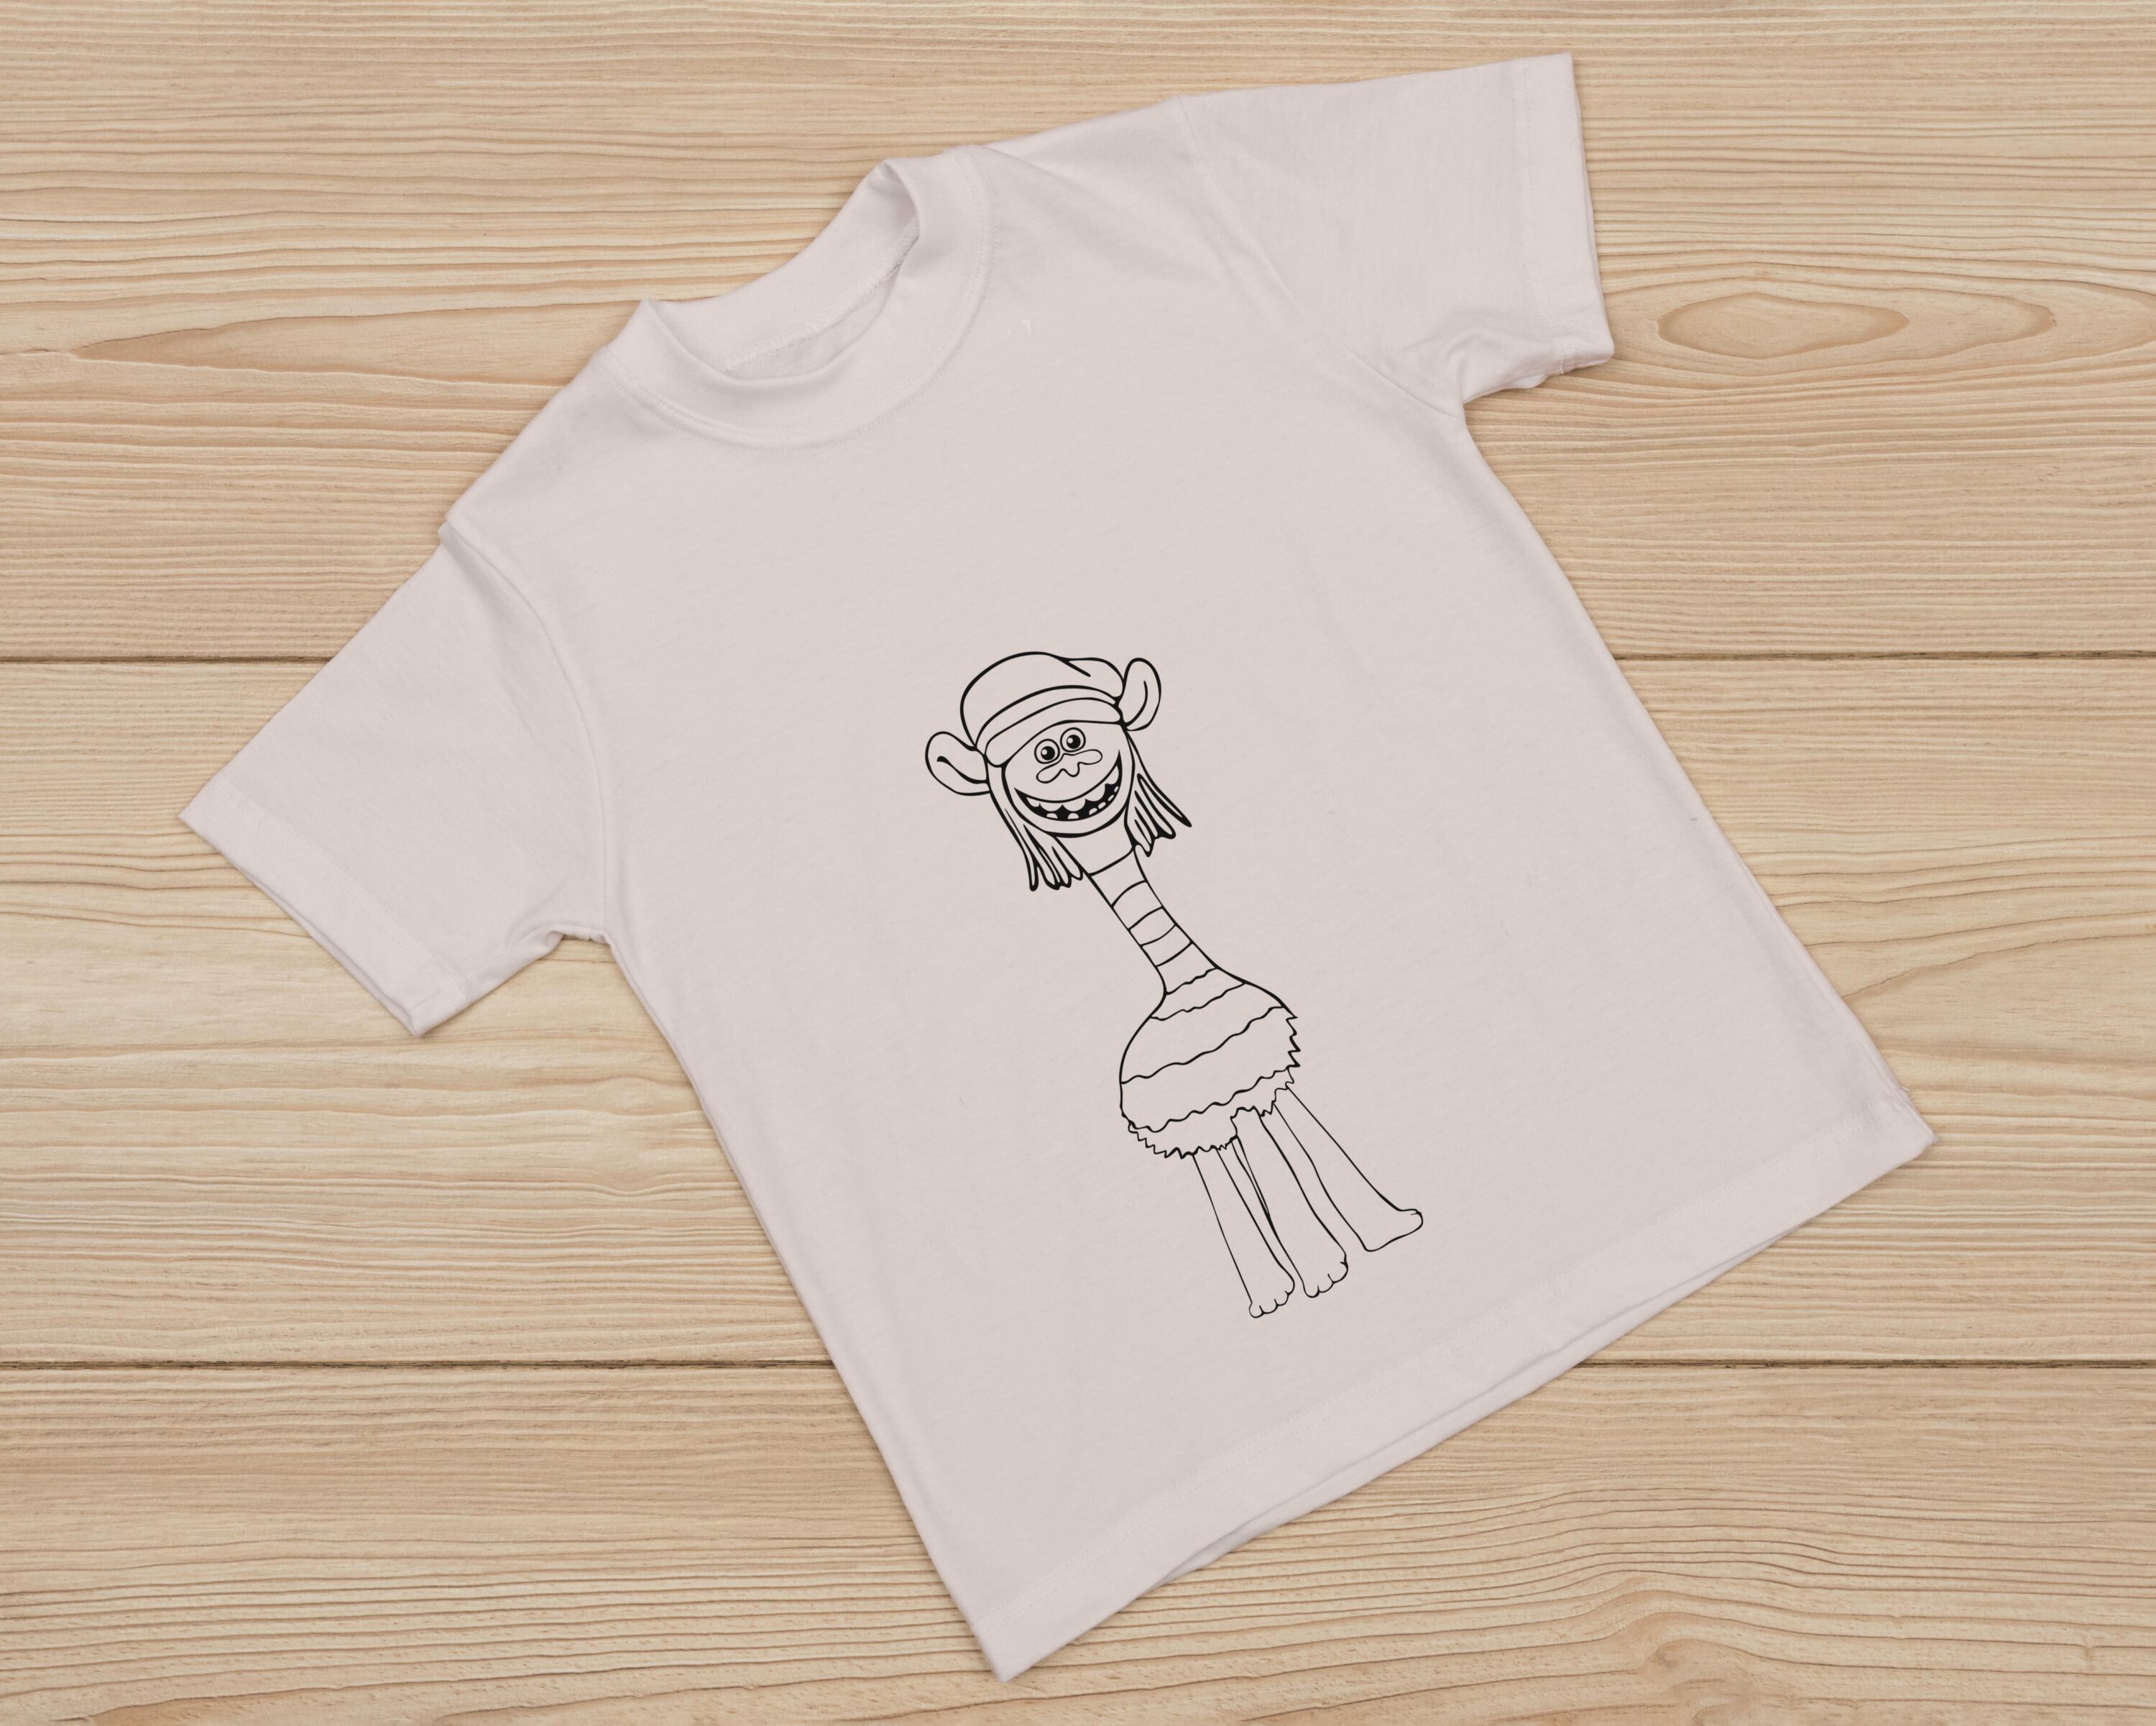 White T-shirt with a black outline of a cartoon character - Cooper.